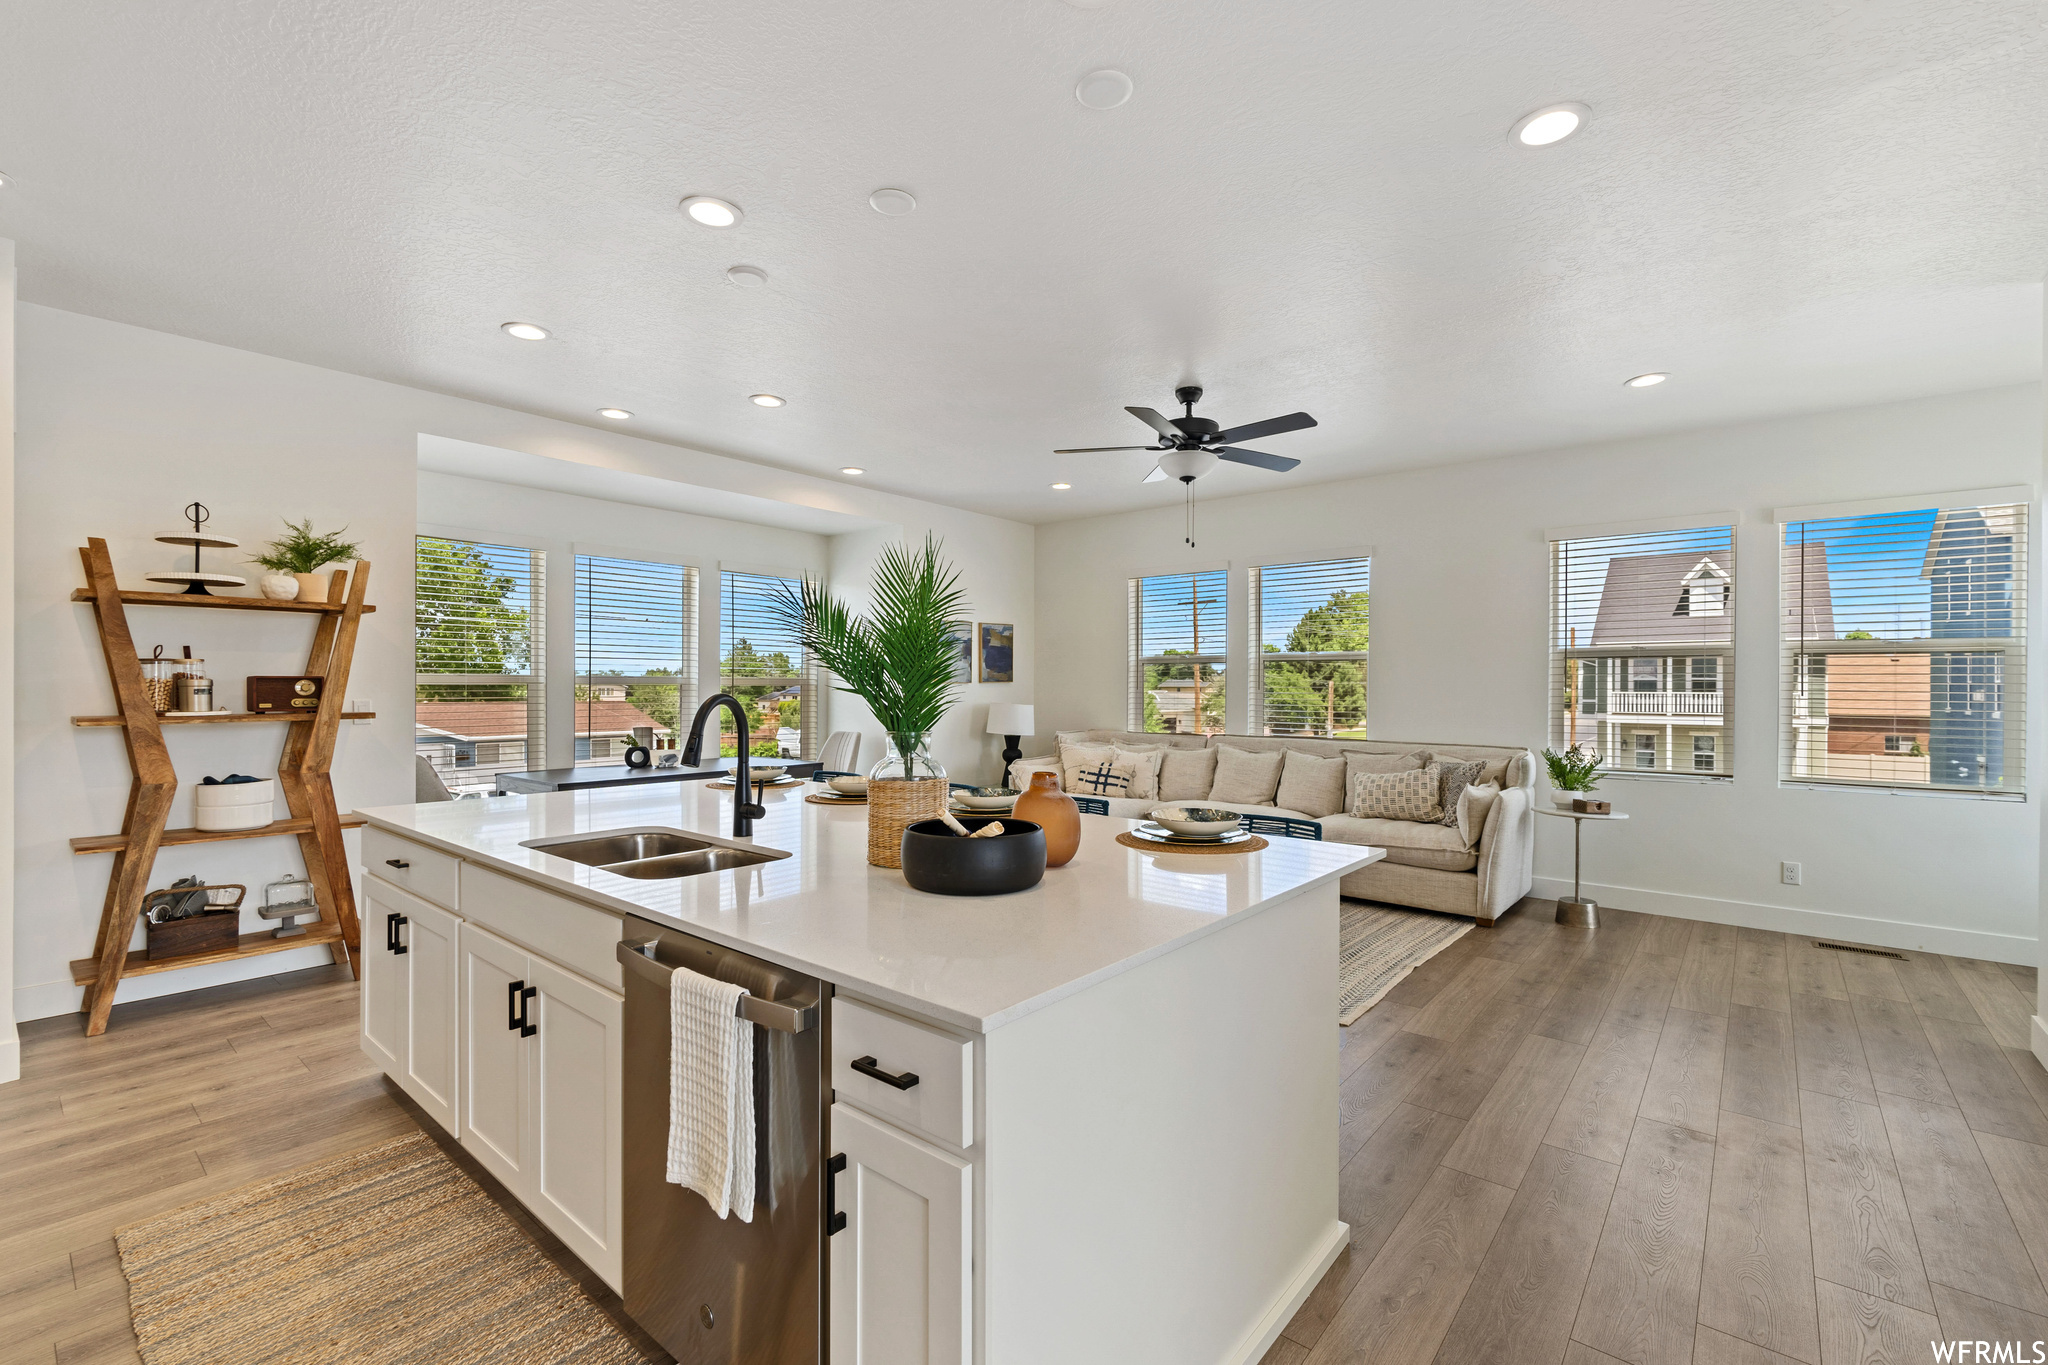 Kitchen with dishwasher, light hardwood / wood-style floors, an island with sink, ceiling fan, and white cabinetry